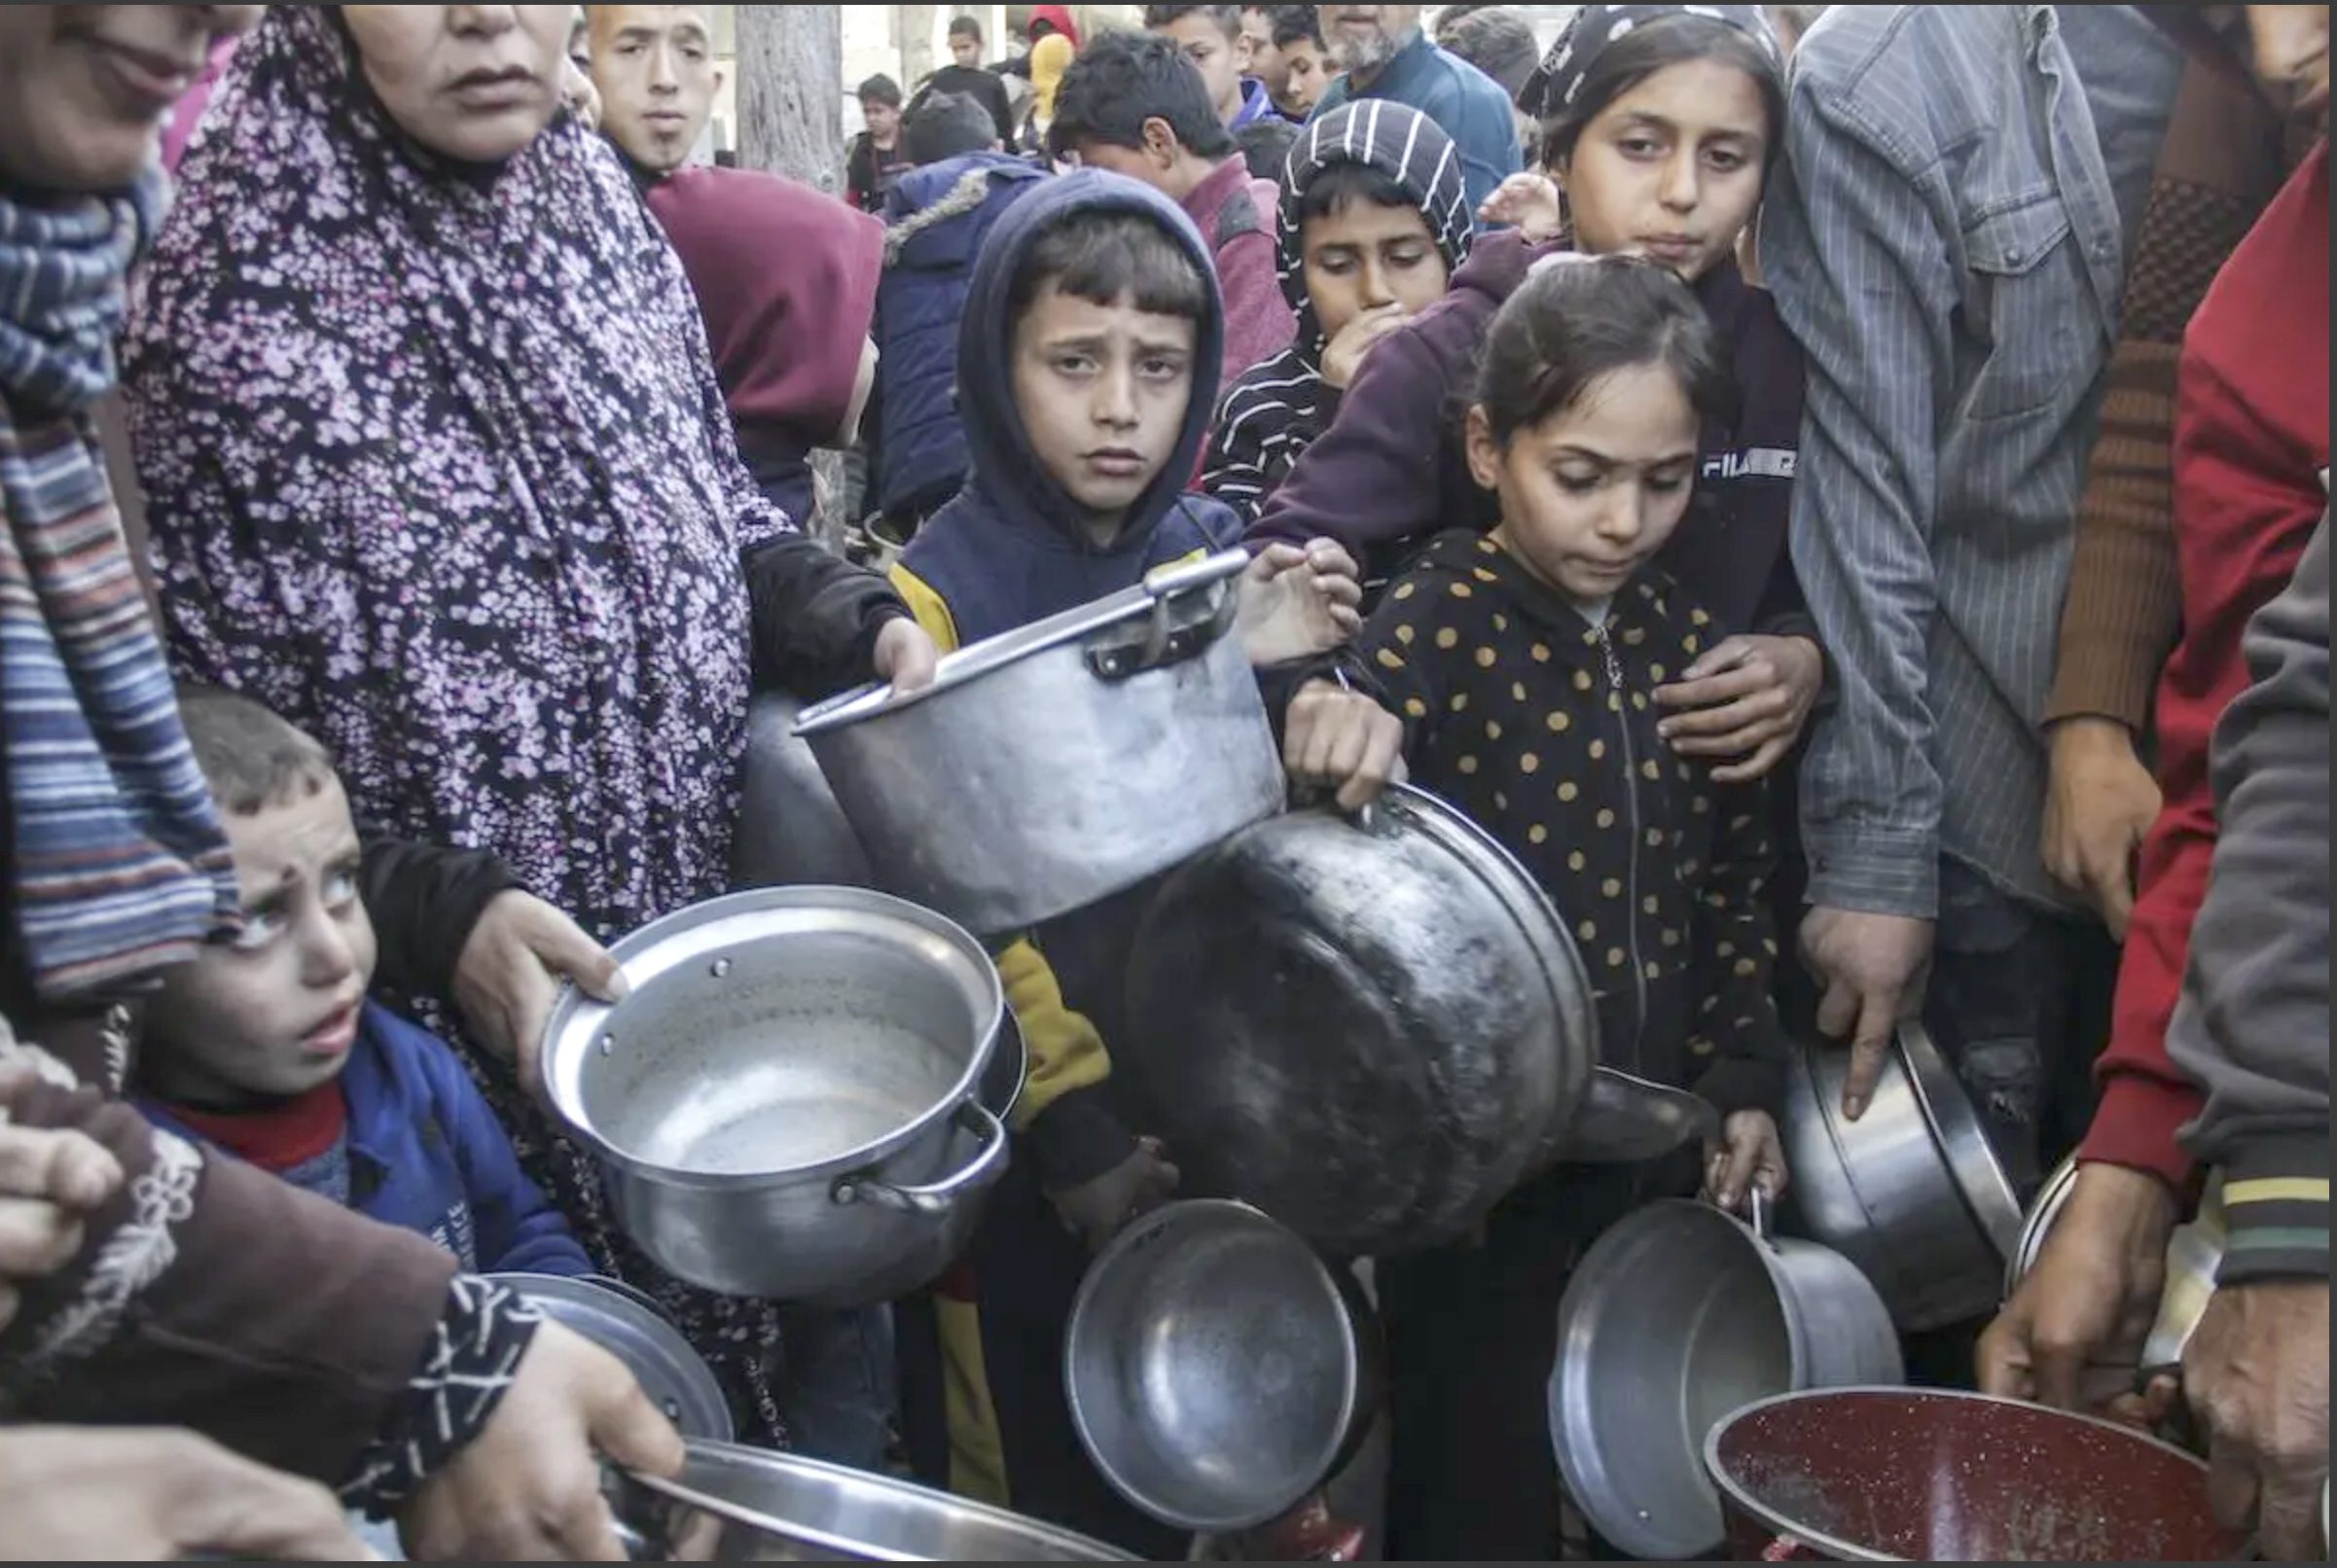 Palestinians break the fast (iftar) under difficult conditions in Jabalia refugee camp on the first day of the Muslim holy month of Ramadan in Gaza on March 11